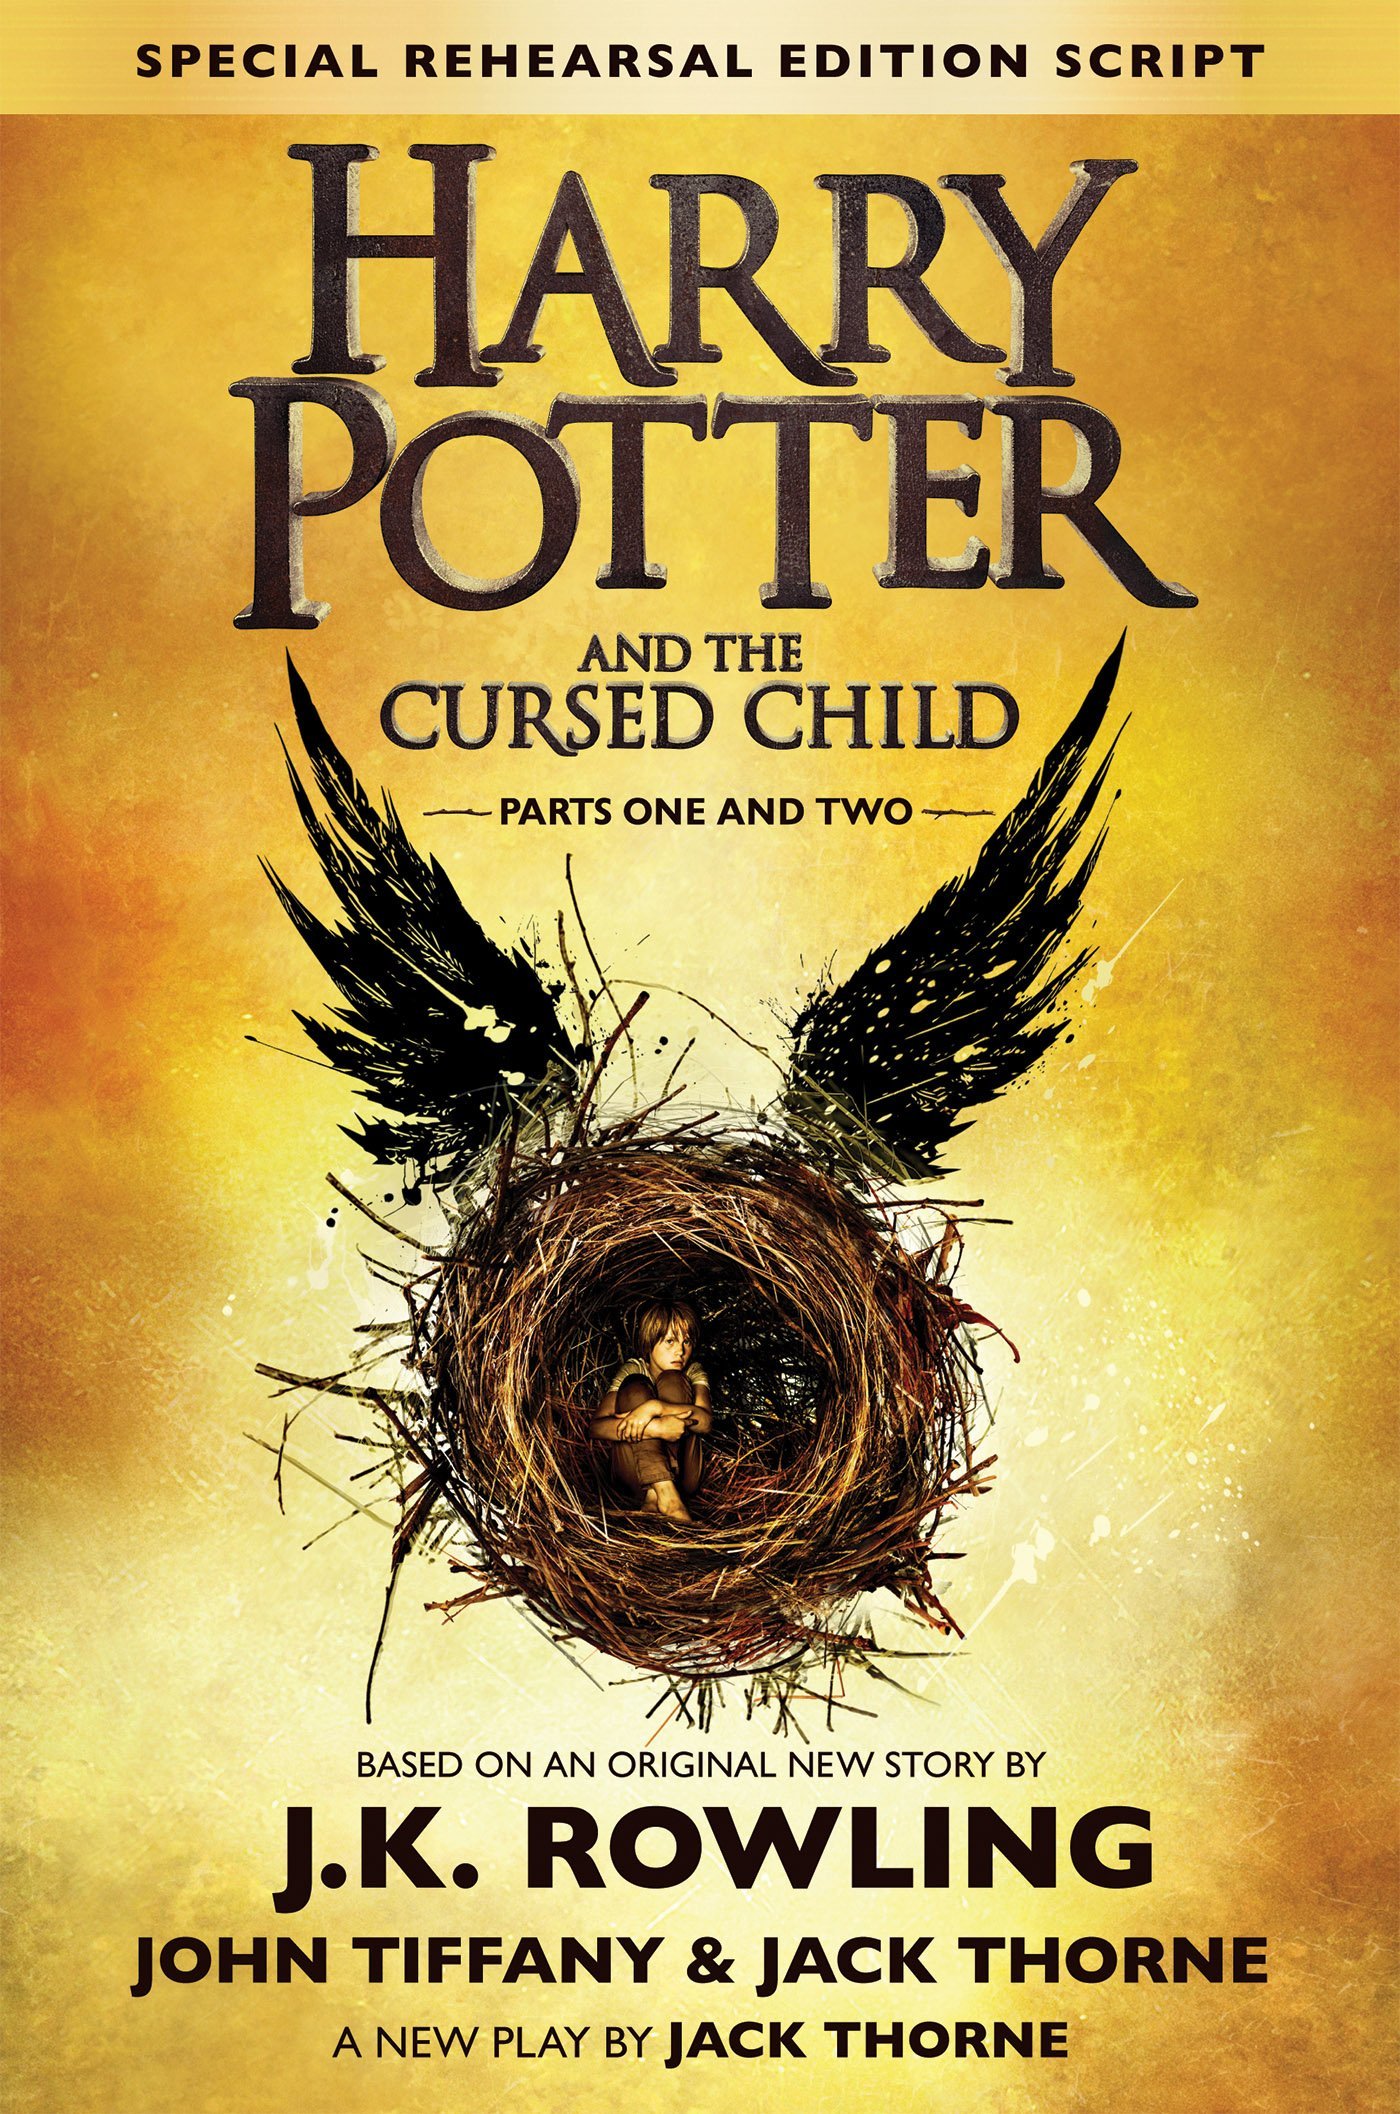 BOOK REVIEW ~ THE NEW HARRY POTTER